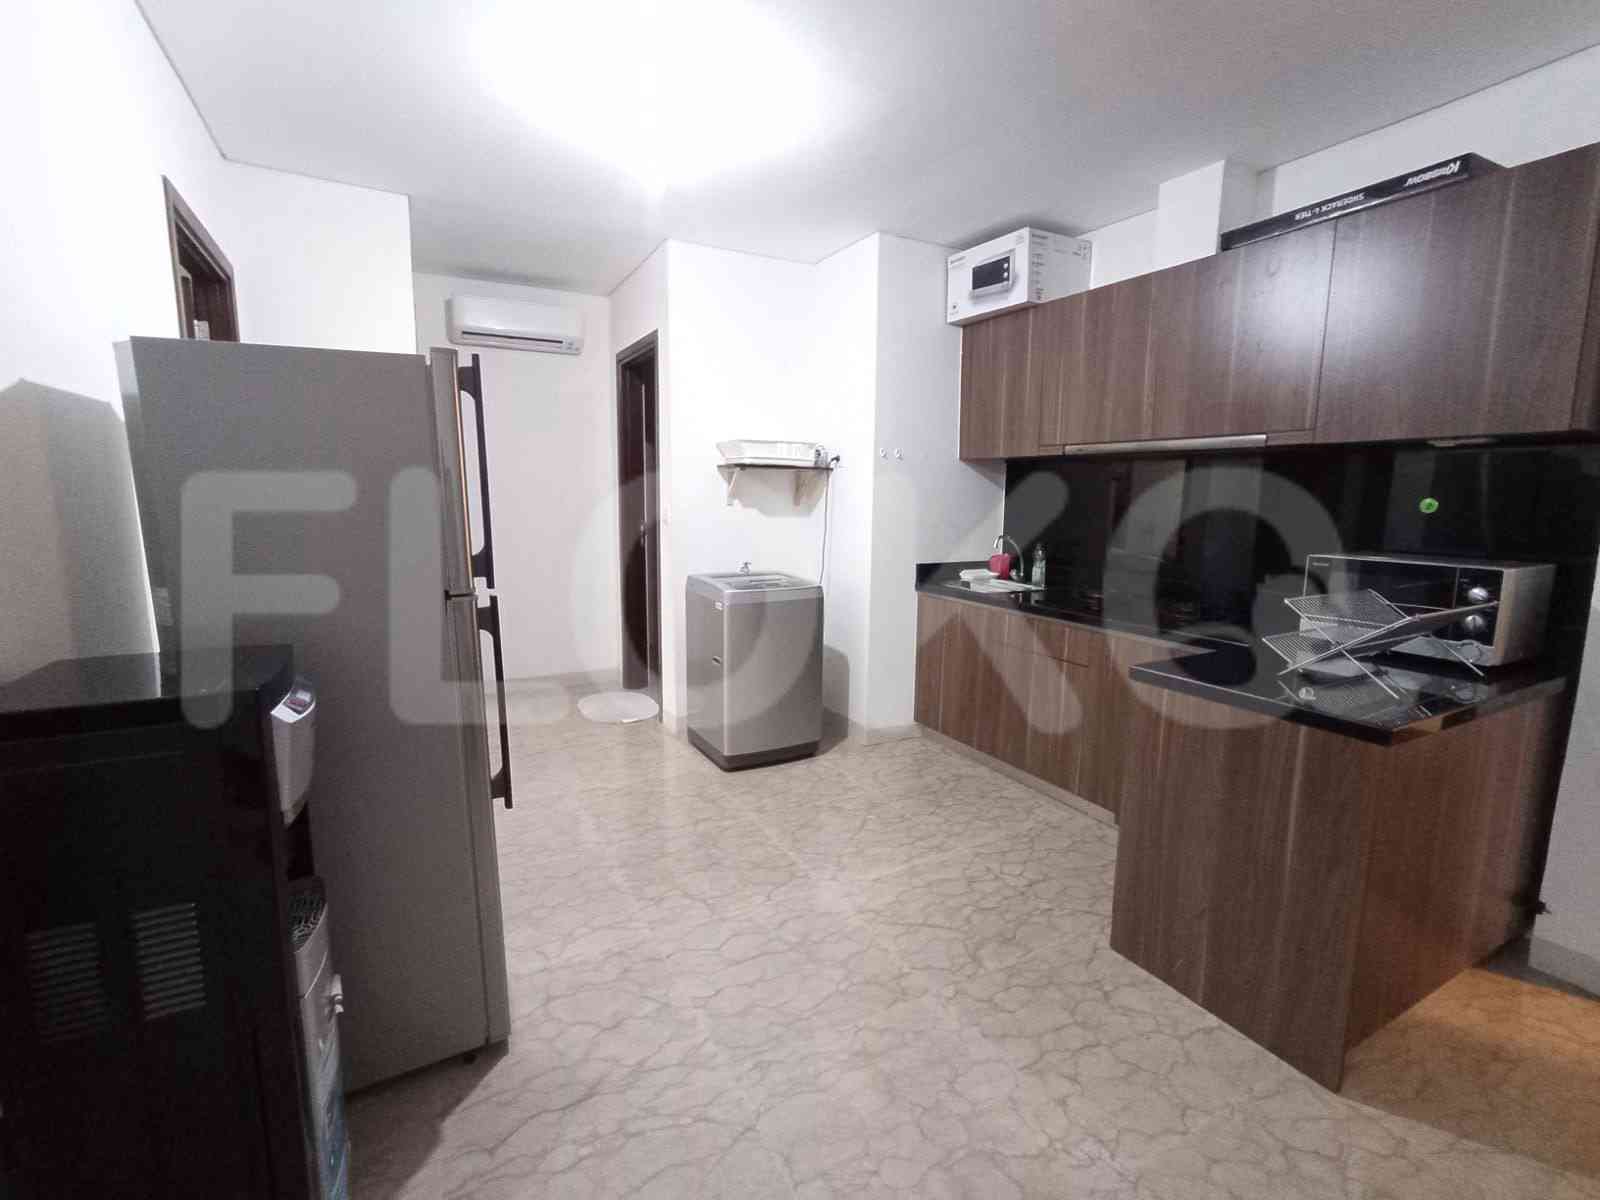 2 Bedroom on 8th Floor for Rent in Lavanue Apartment - fpad34 6